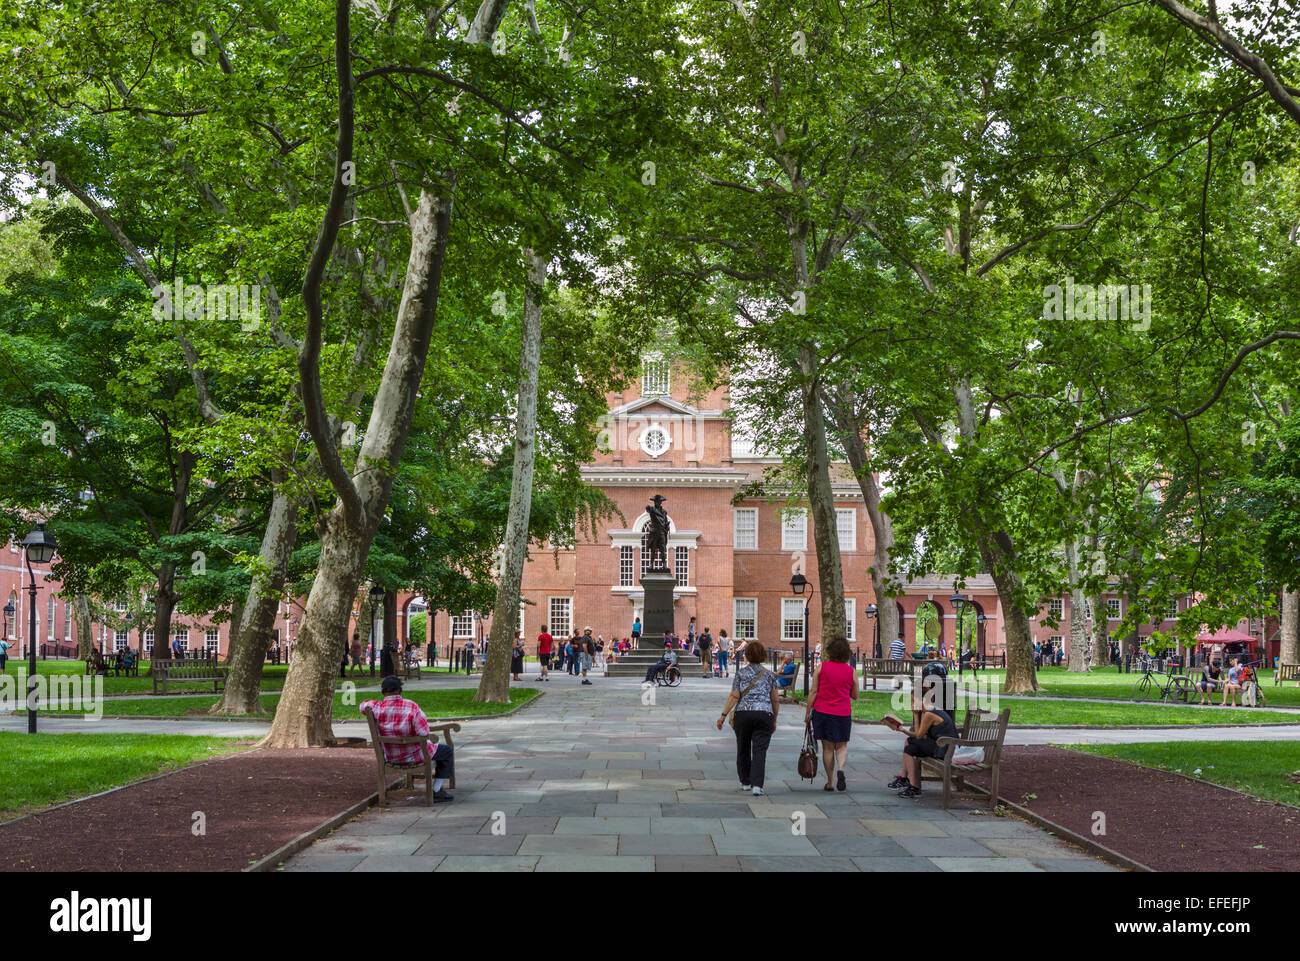 Independence Square in front of Independence Hall, Independence National Historical Park, Philadelphia, Pennsylvania, USA Stock Photo